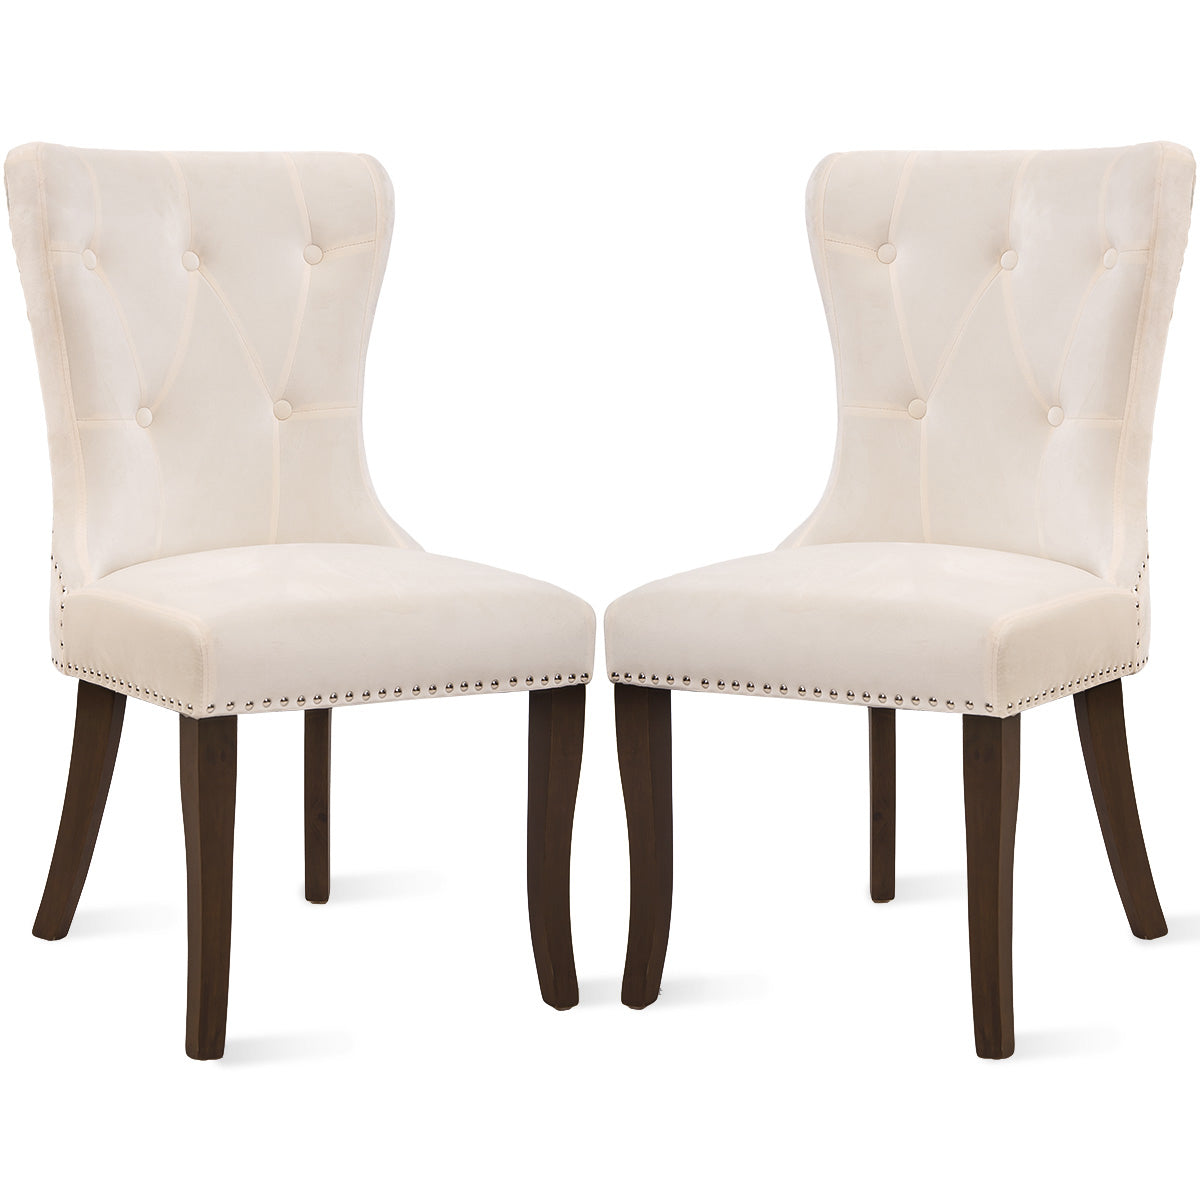 TOPMAX Cream Dining Chair Set of 4